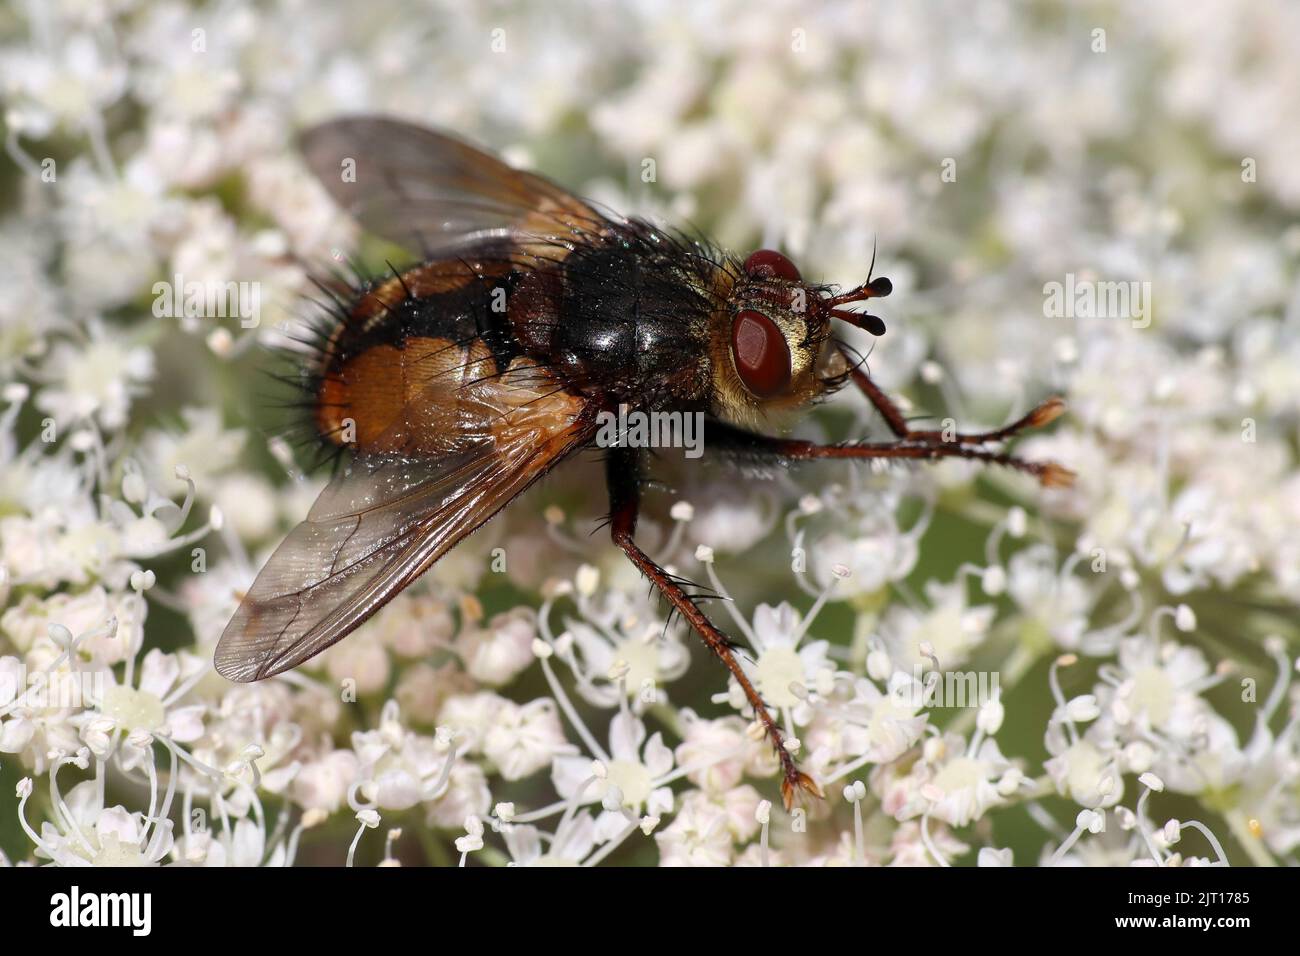 Tachina fera on umbellifer flower rubbing legs together to clean them Stock Photo